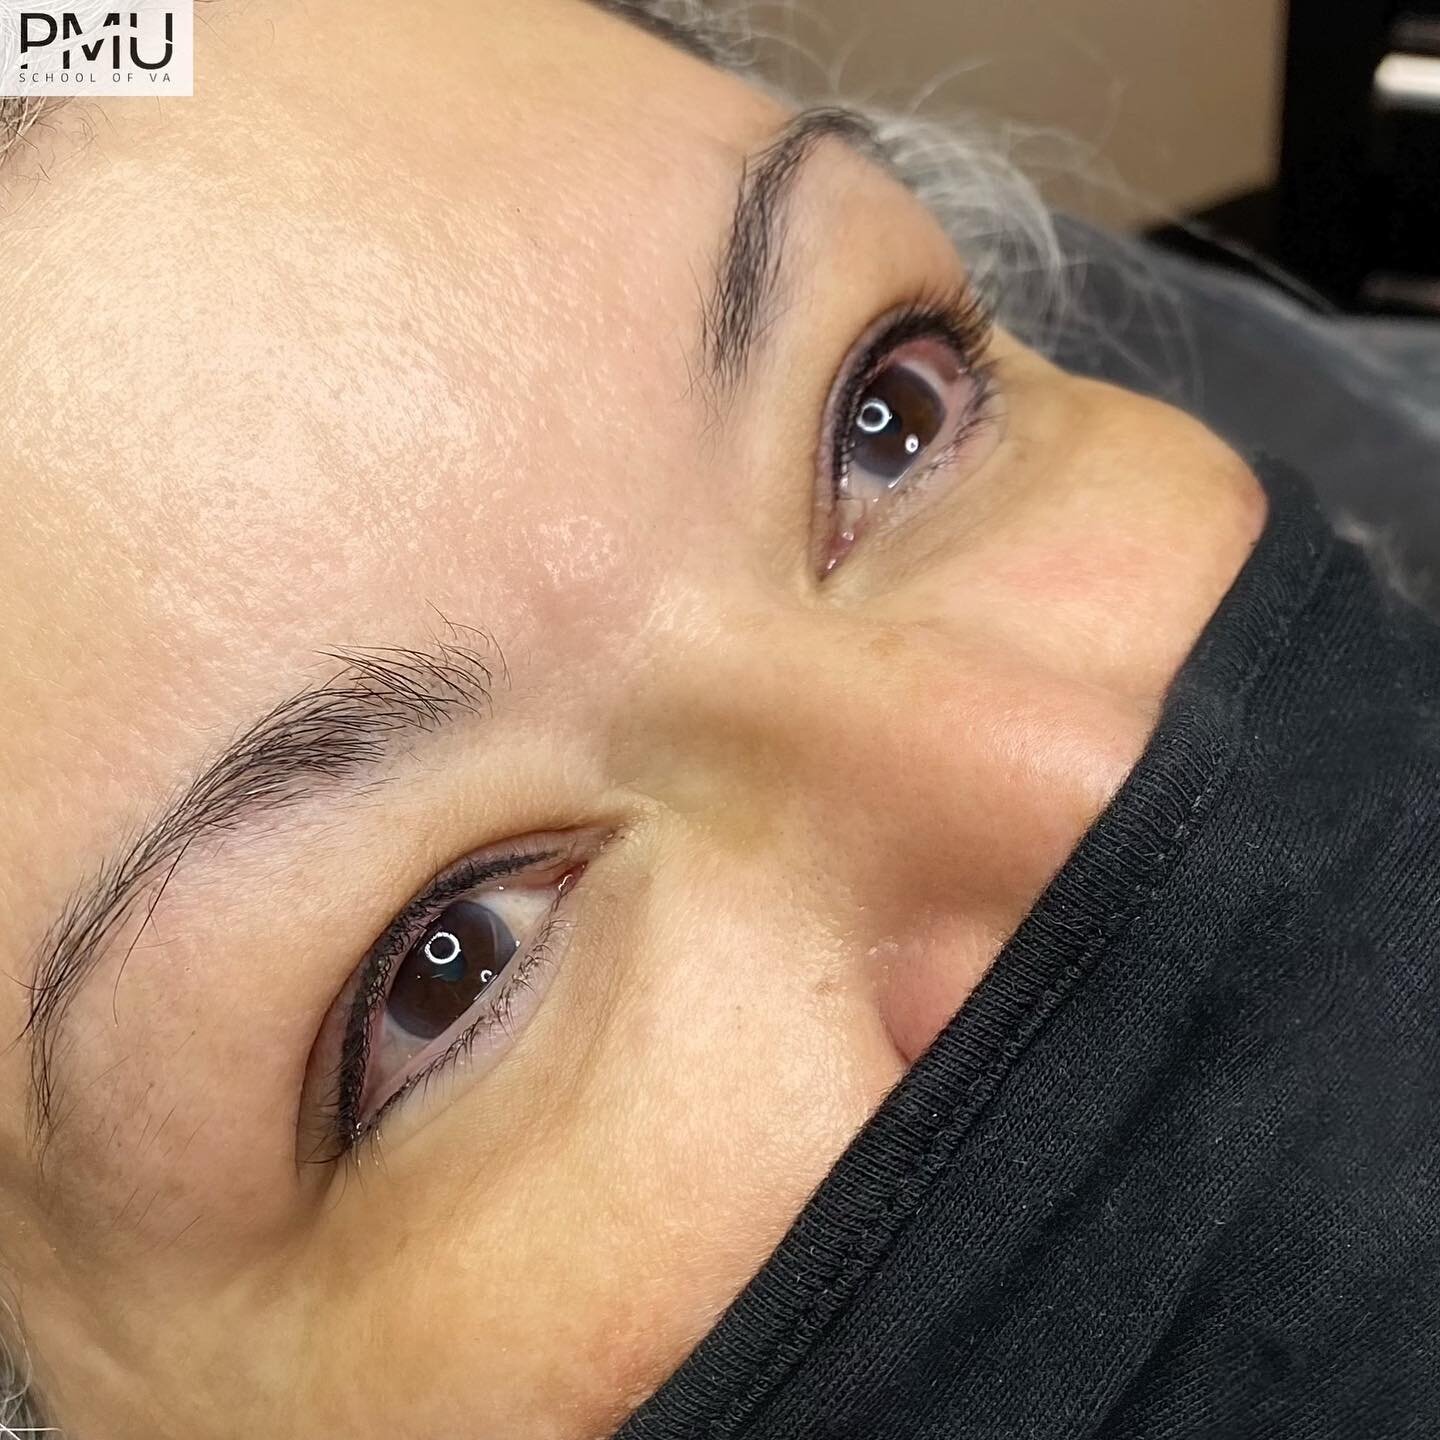 So proud of one of our students from our &ldquo;Complete Permanent Makeup Course.&rdquo;

This is her very first lash enhancement model. Look at that precision and even saturation. Great job @abagailg ! 

We&rsquo;re creating and developing the most 